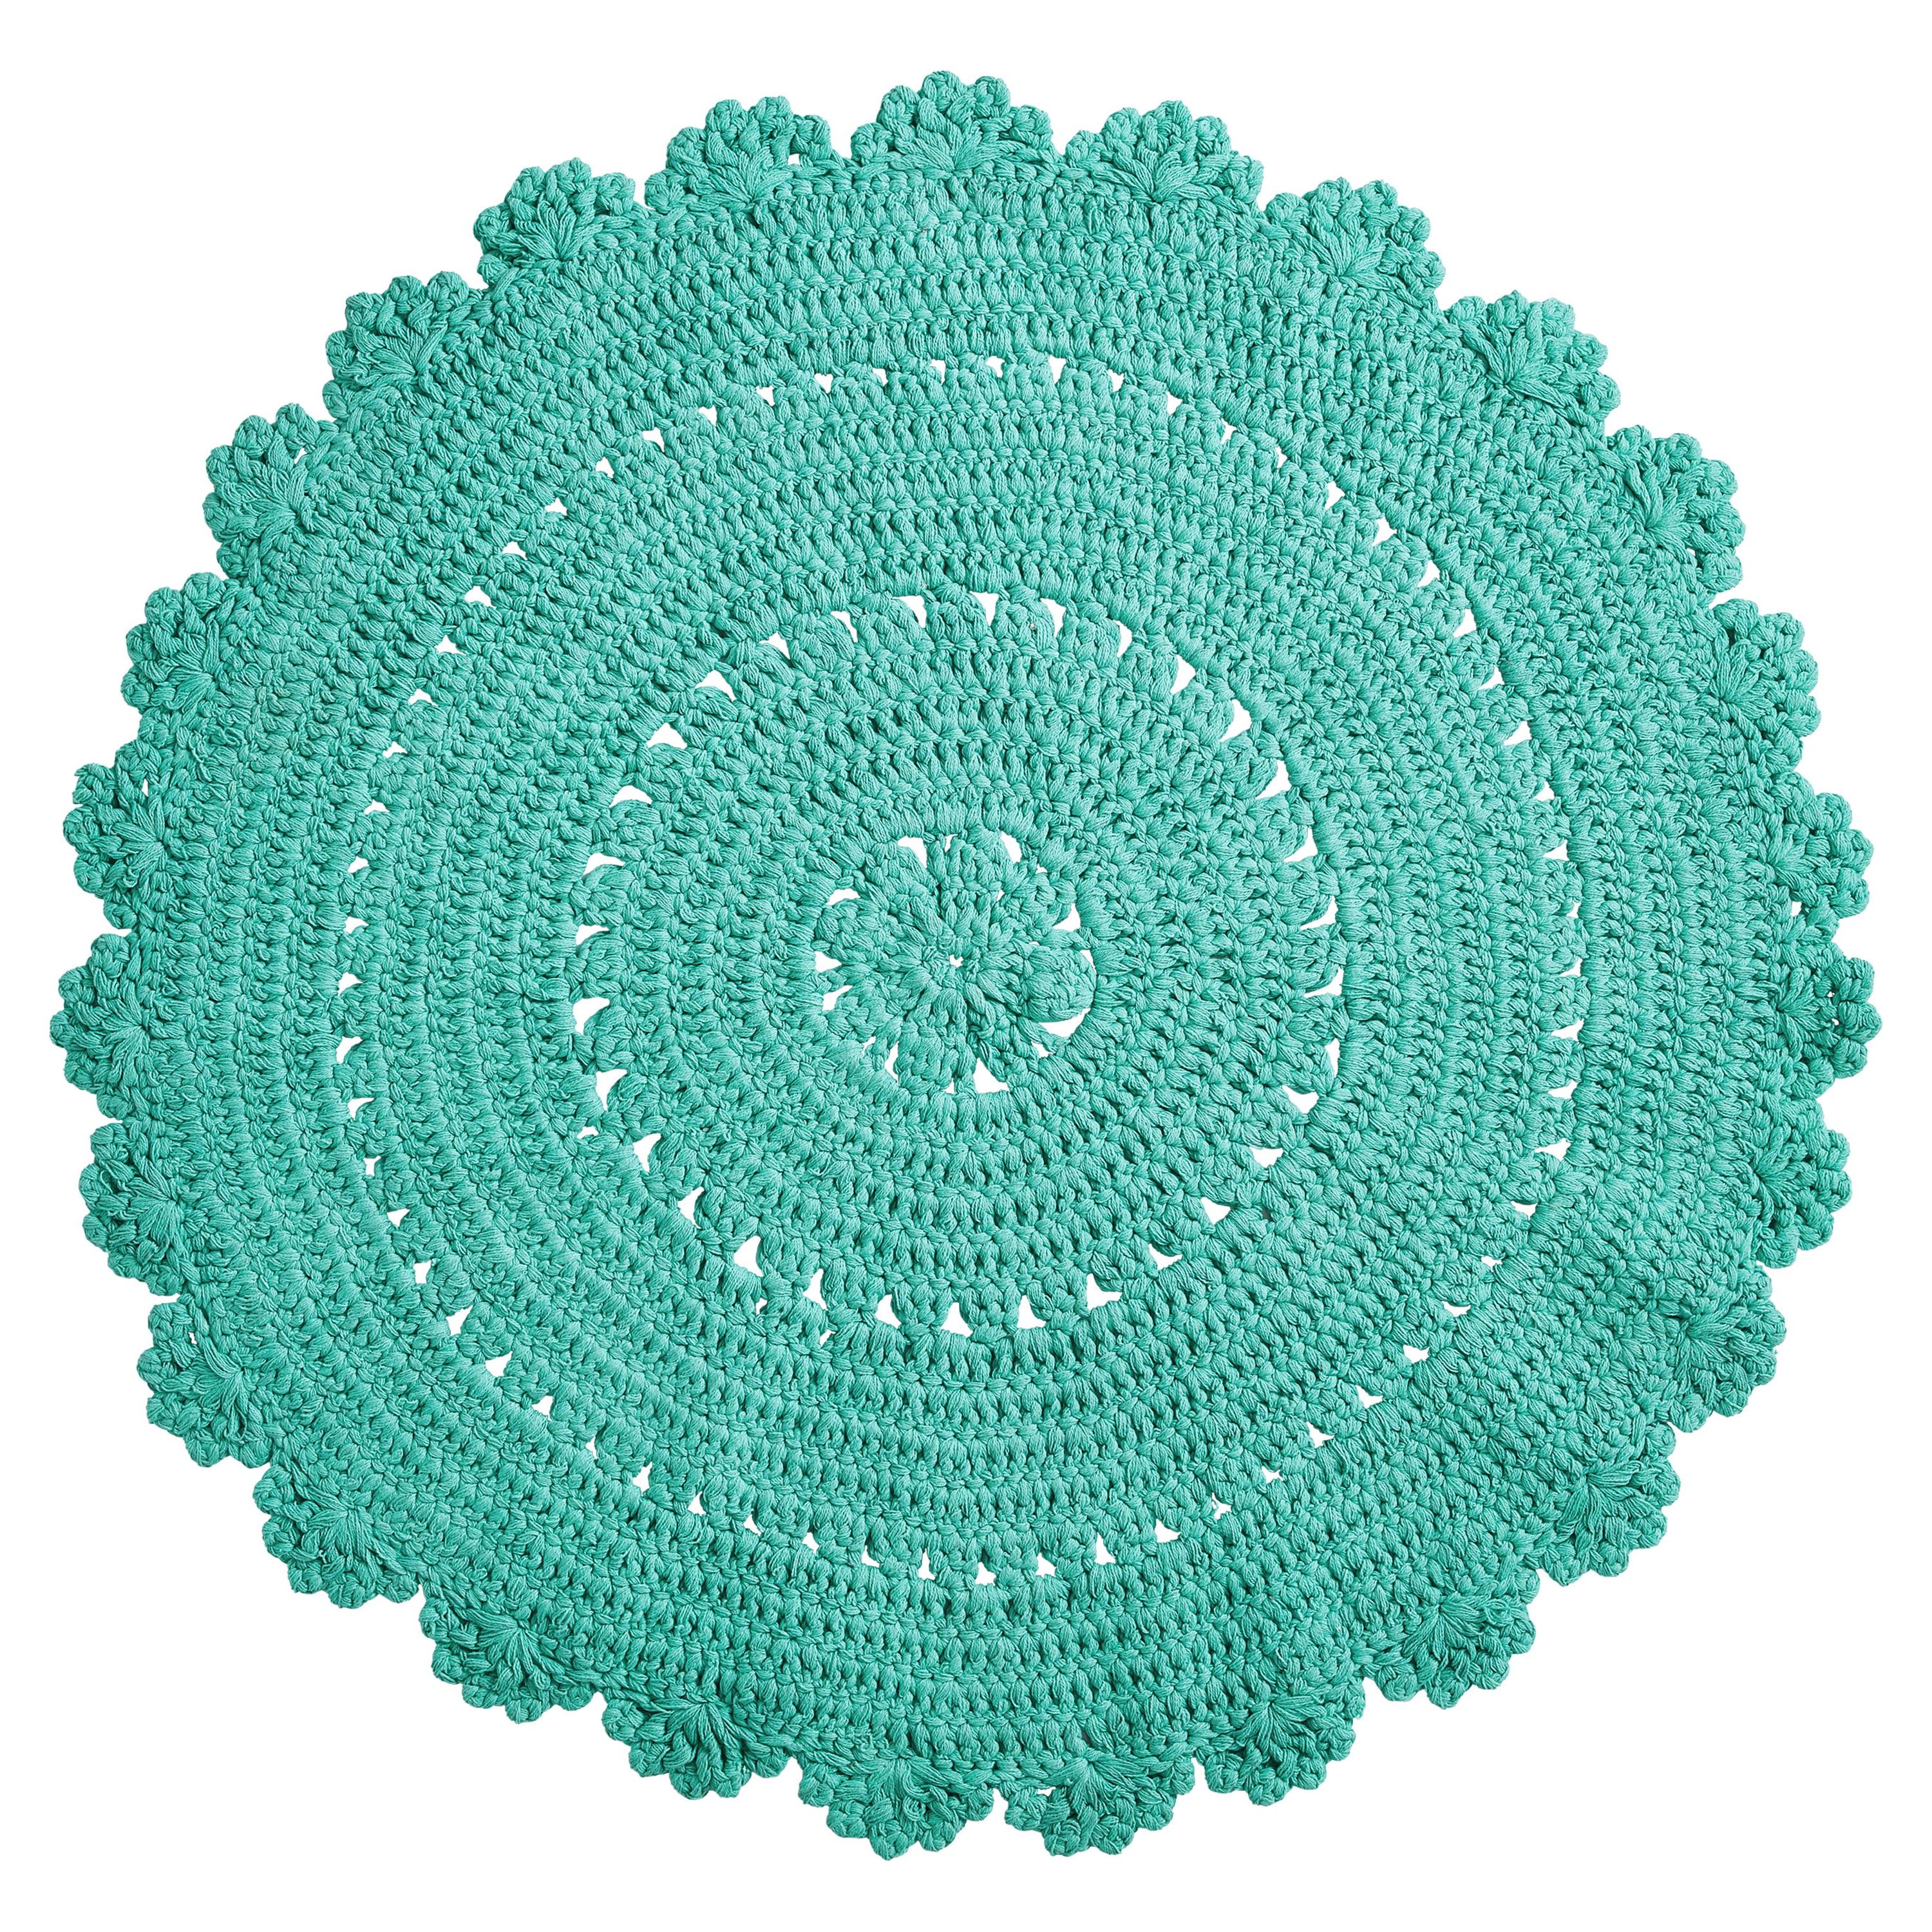 The Pioneer Woman Round Cotton Crochet Accent Rug, Teal - image 1 of 5